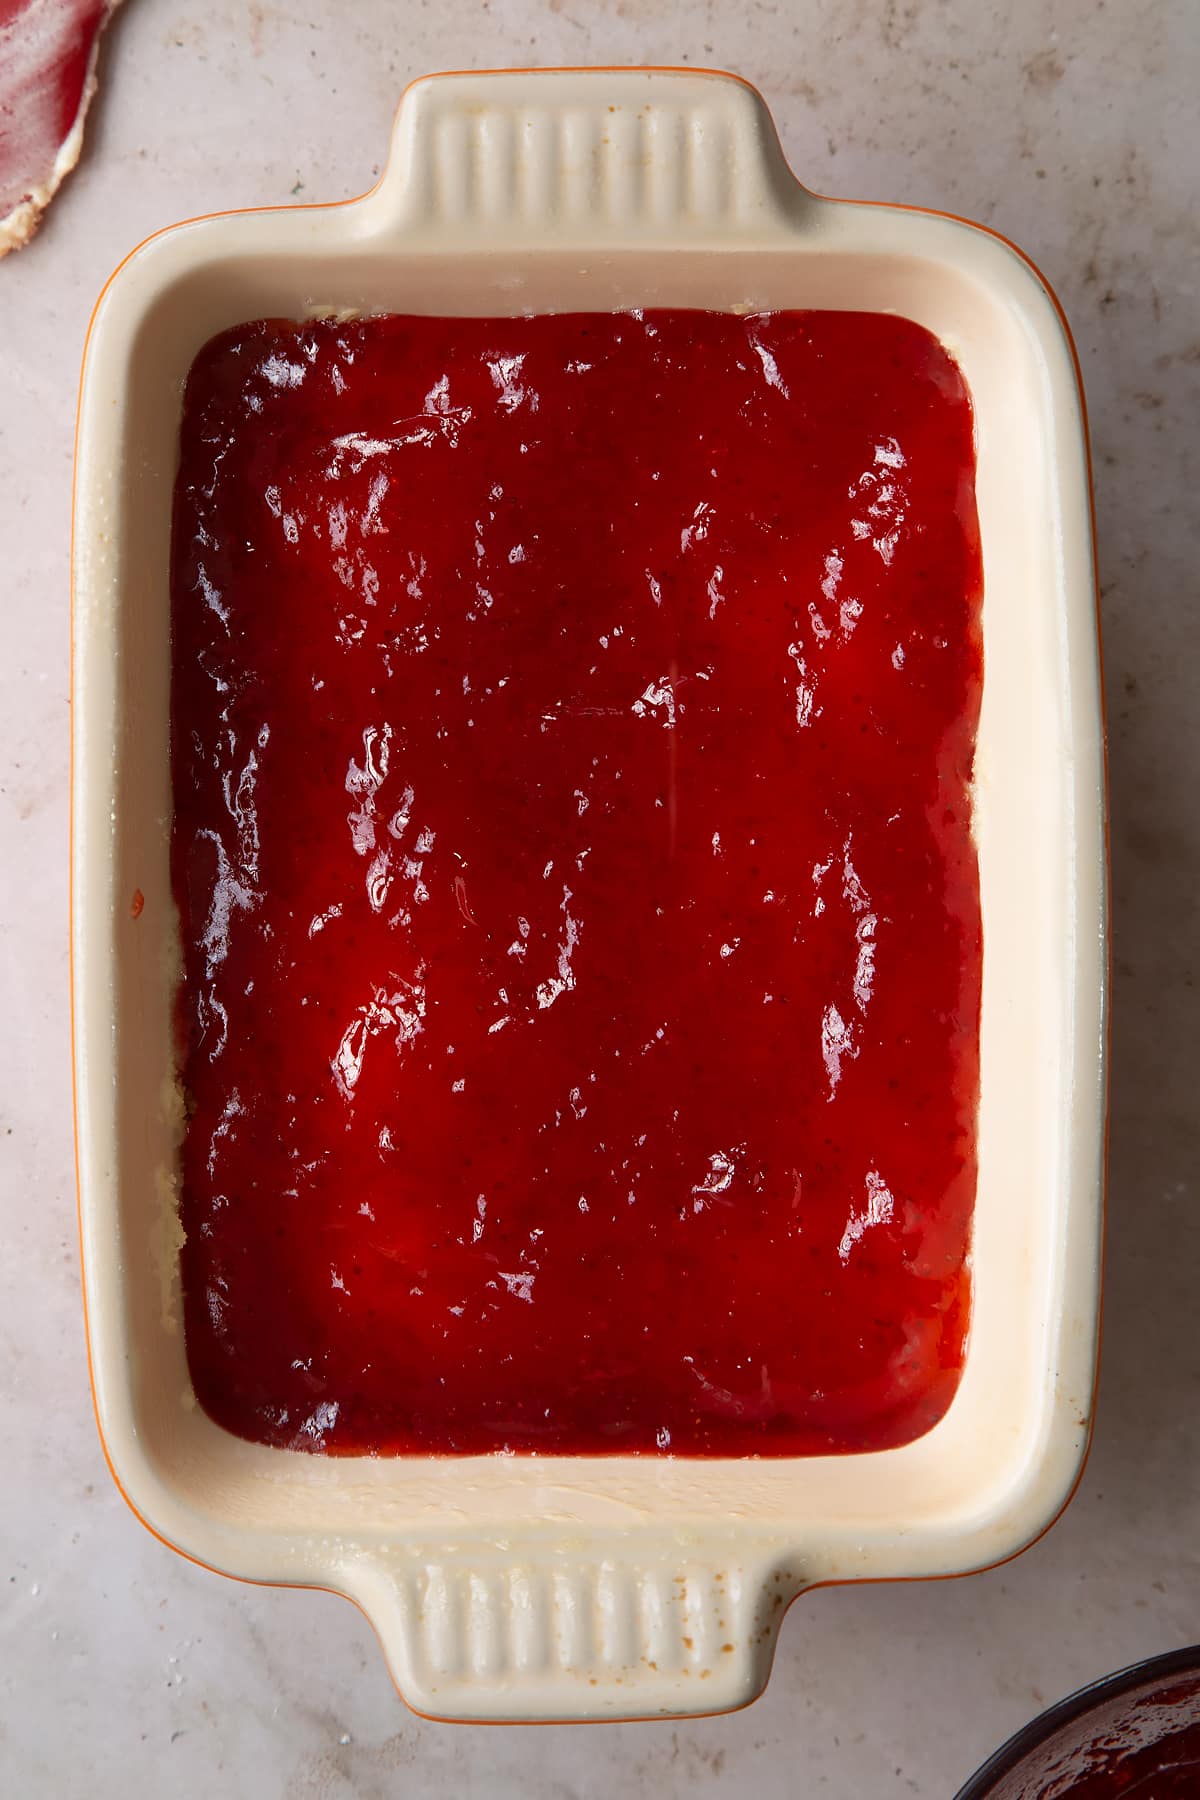 cooked vegan sponge mixture in a greased ceramic oven proof dish topped with jam.